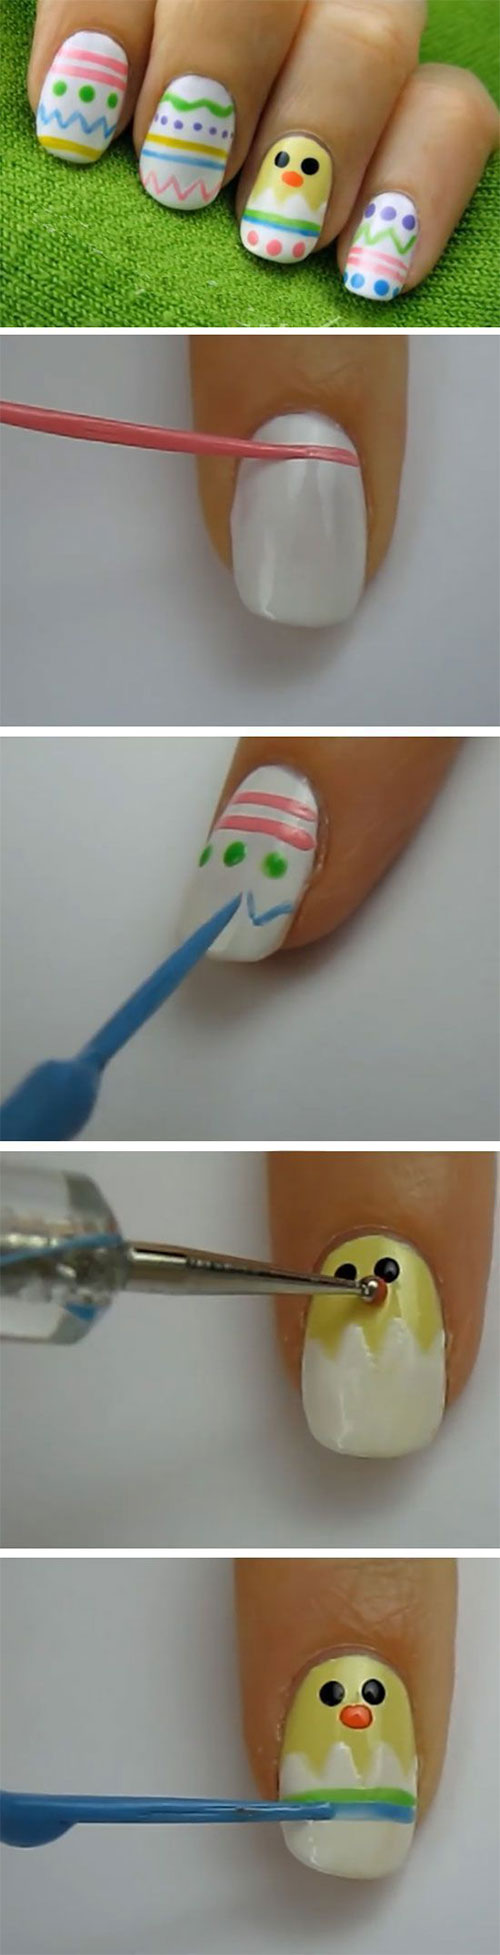 10-Step-By-Step-Easter-Nail-Art-Tutorials-For-Learners-2017-6